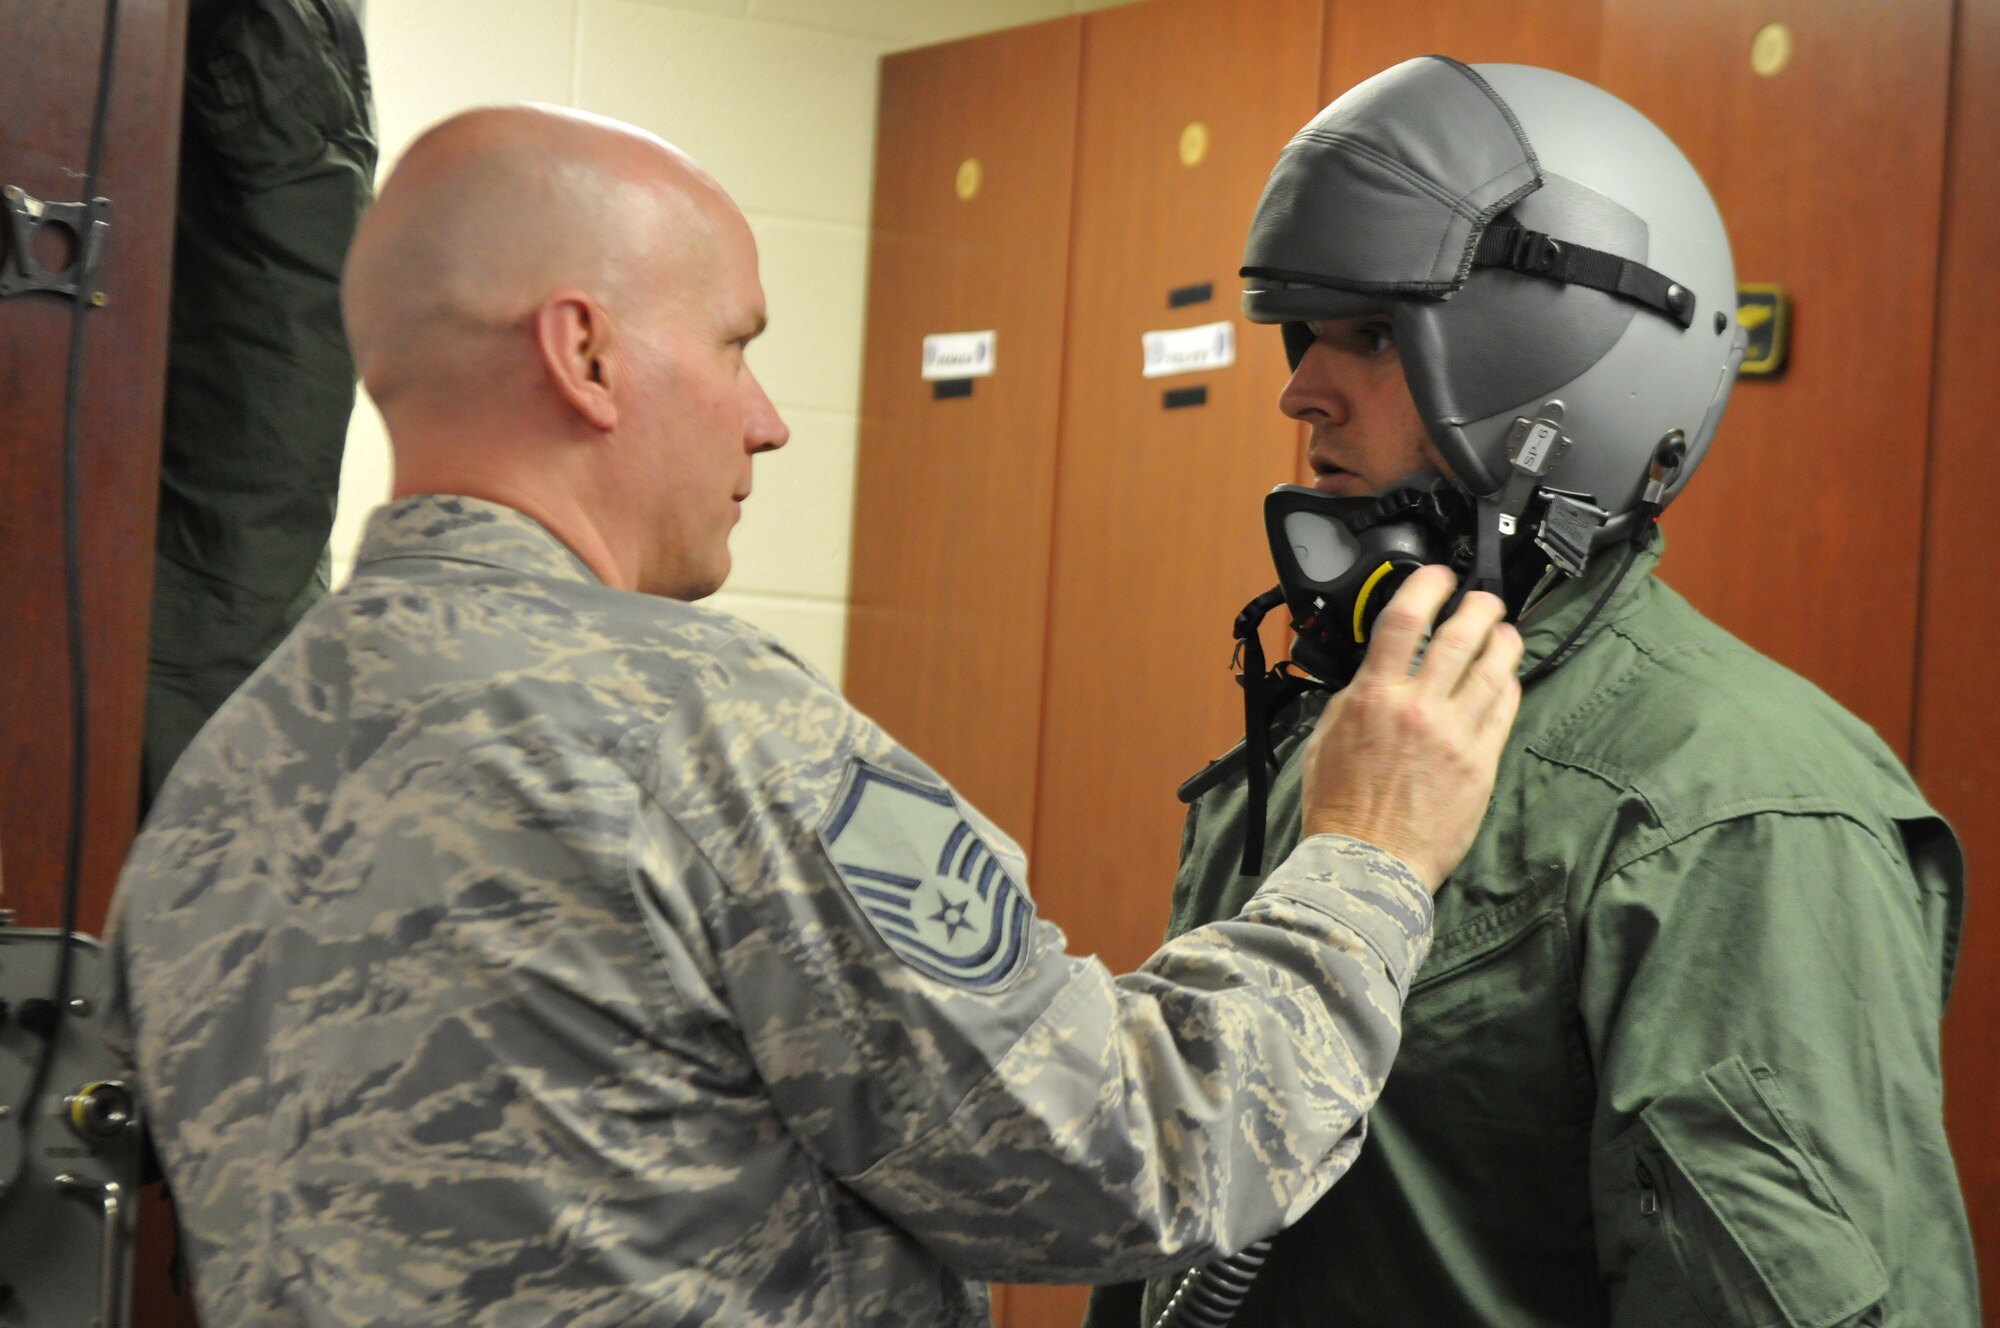 Master Sgt. Steve Johnson, Deployed Aircrew Flight Equipment NCO in Charge, 113th Operations Group, adjusts the mask-fitting on Master Sgt. Kevin Atkins, 113th Wing weather forecaster, prior to a Familiarization Flight at Naval Air Station Joint Reserve Base New Orleans, La. The D.C. Air National Guard Airmen are participating in a two-week flying exercise titled Sentry Voodoo in New Orleans. (Air National Guard photo by Senior Airman Erica Rodriguez/Released)